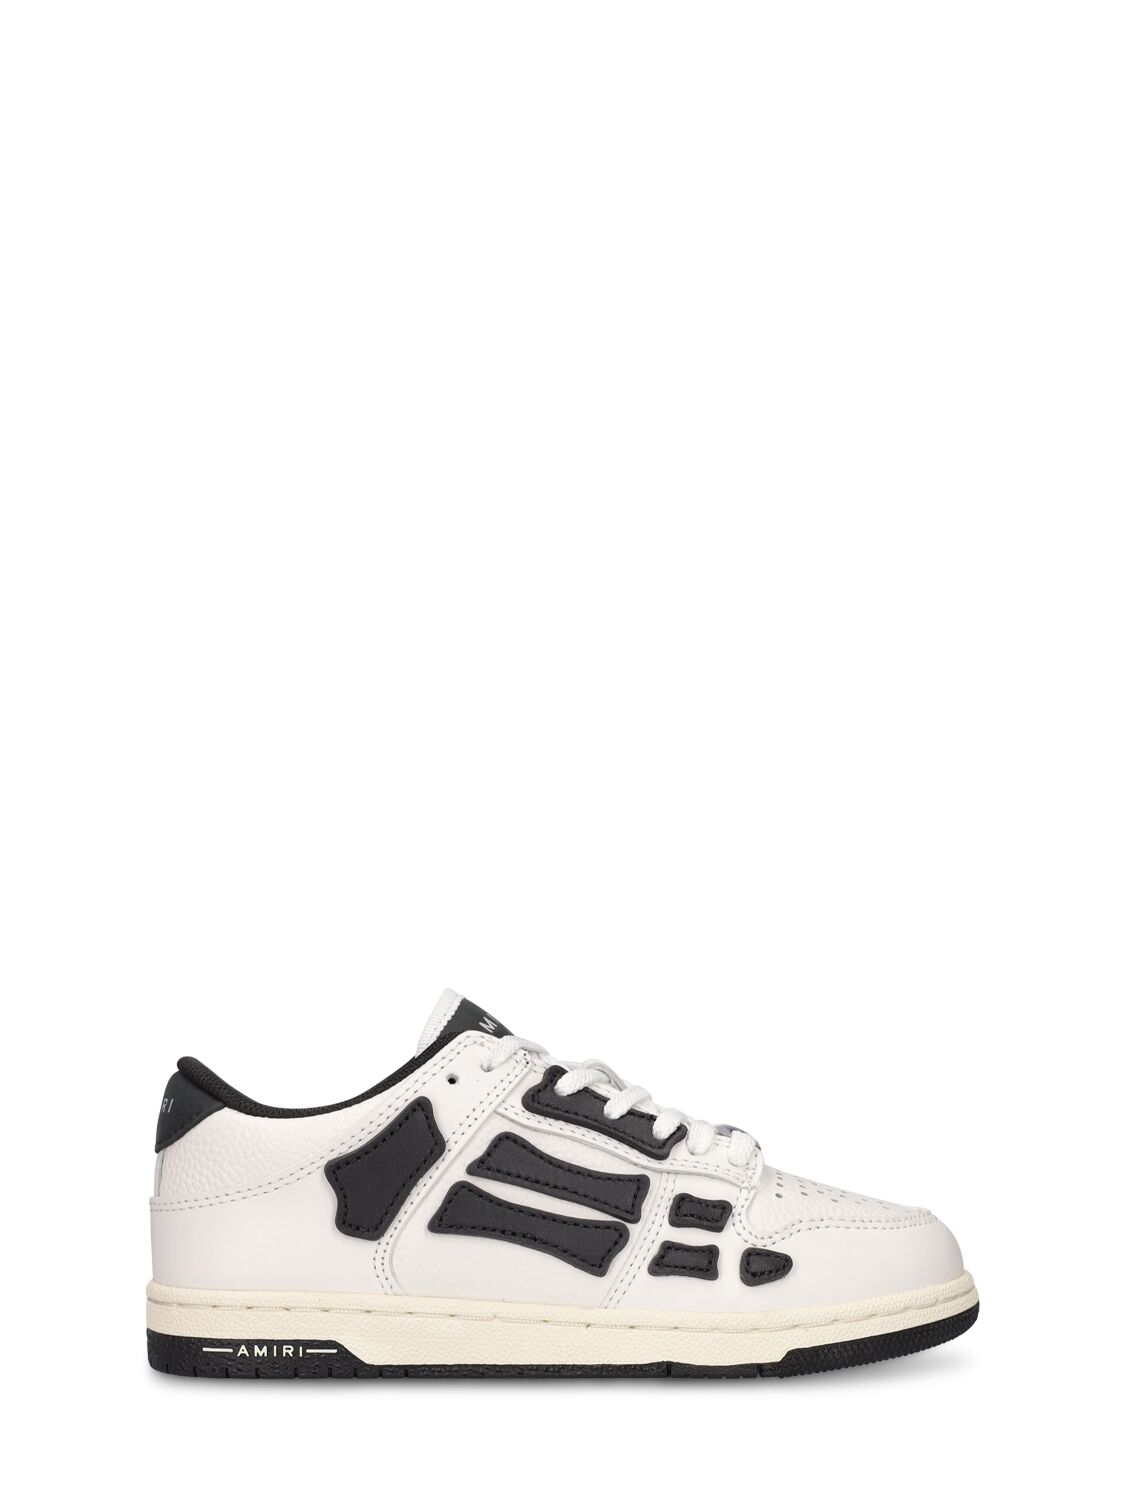 Amiri Kids' Leather Lace-up Sneakers In White,black